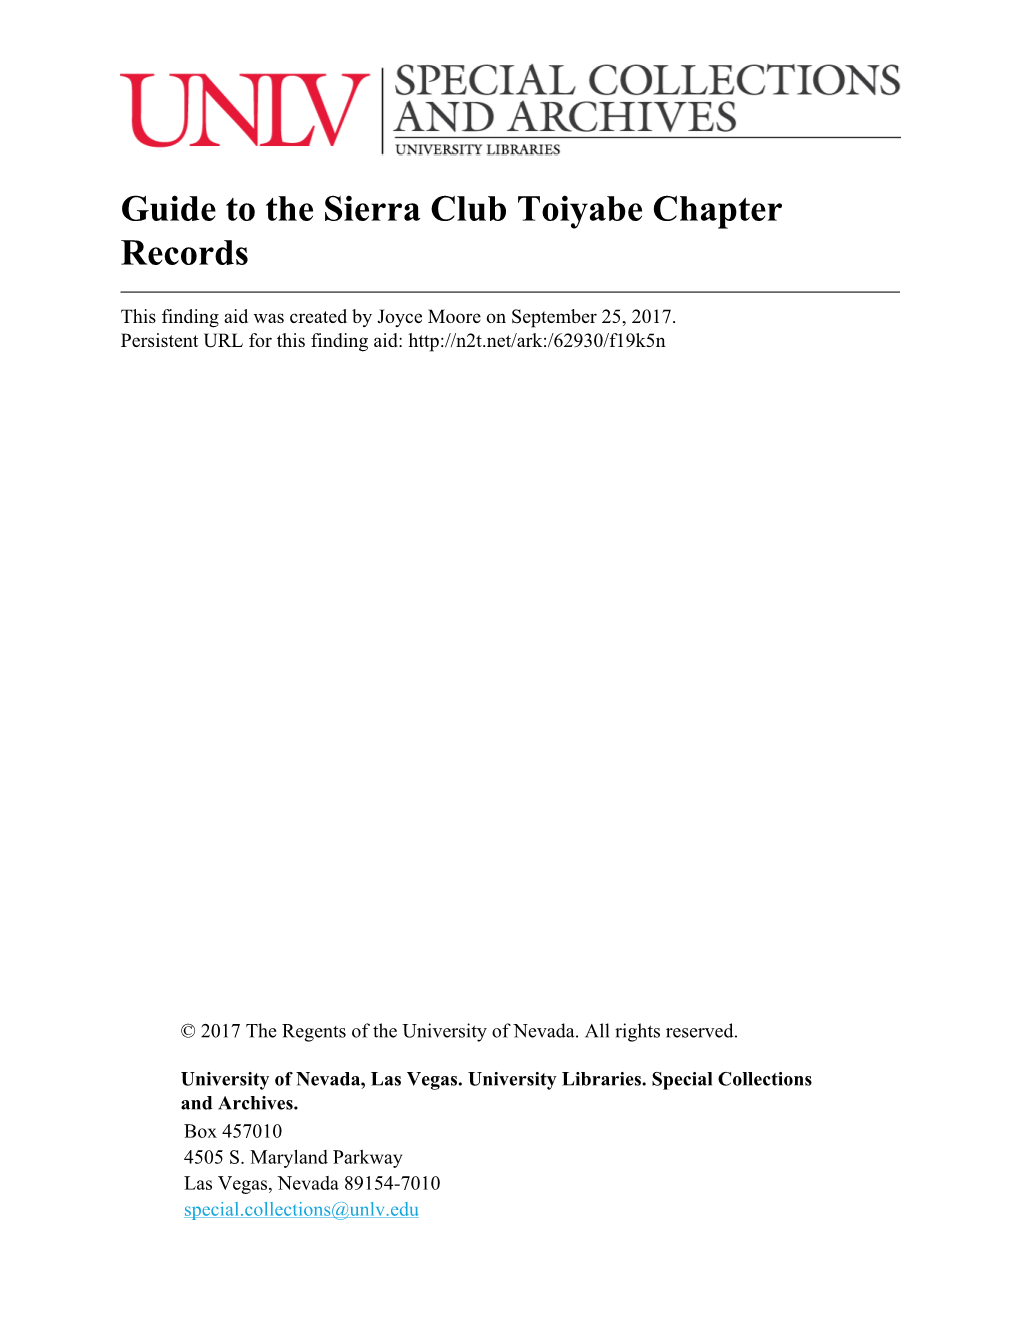 Guide to the Sierra Club Toiyabe Chapter Records